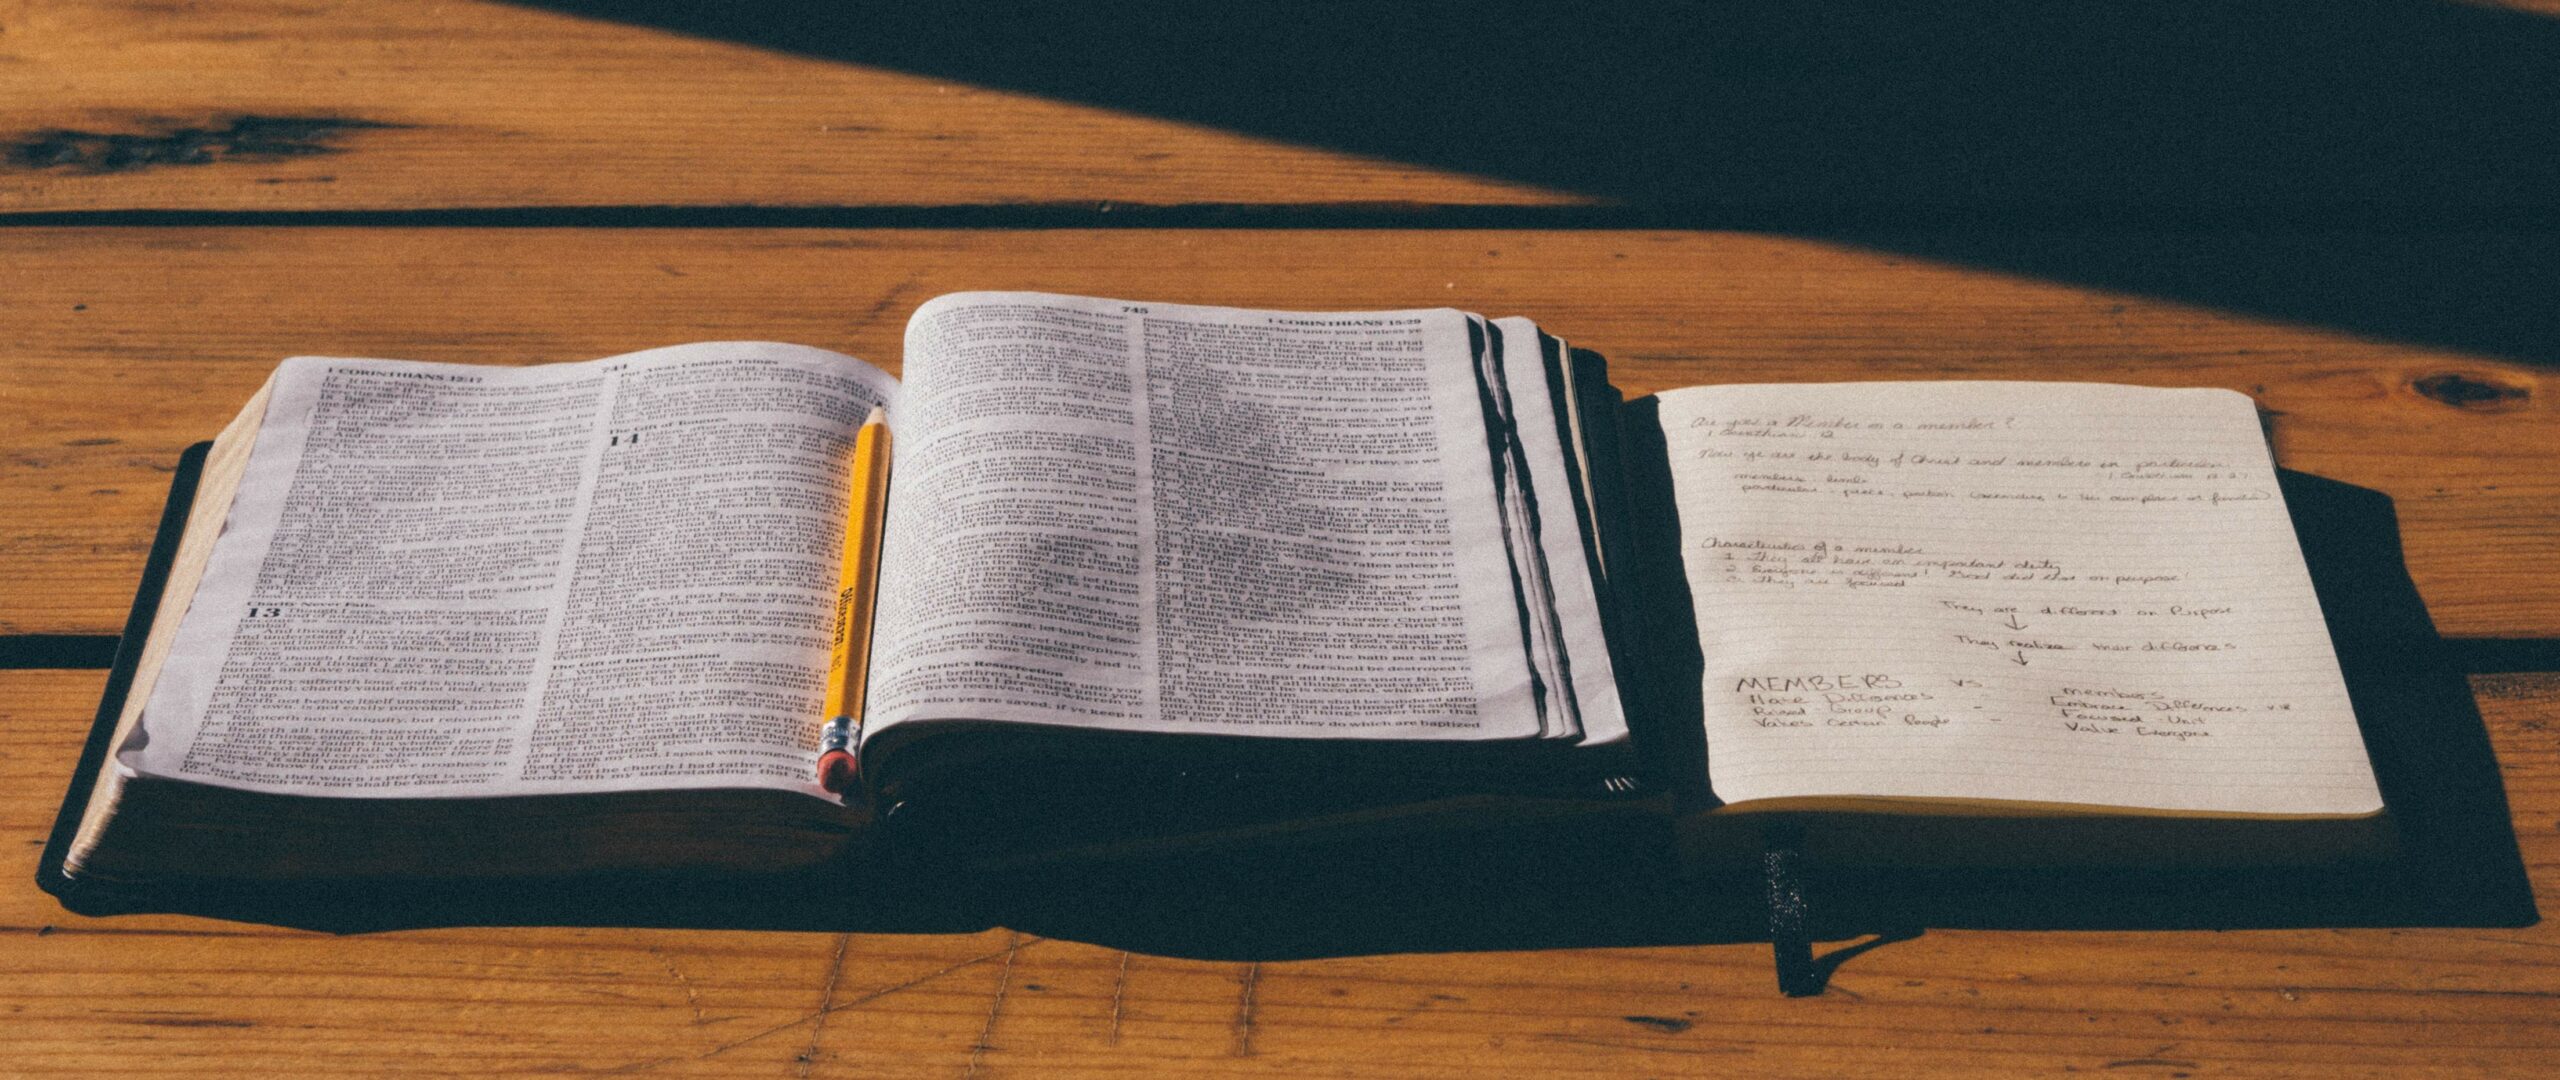 Featured Image for Resources to Help Study the Bible